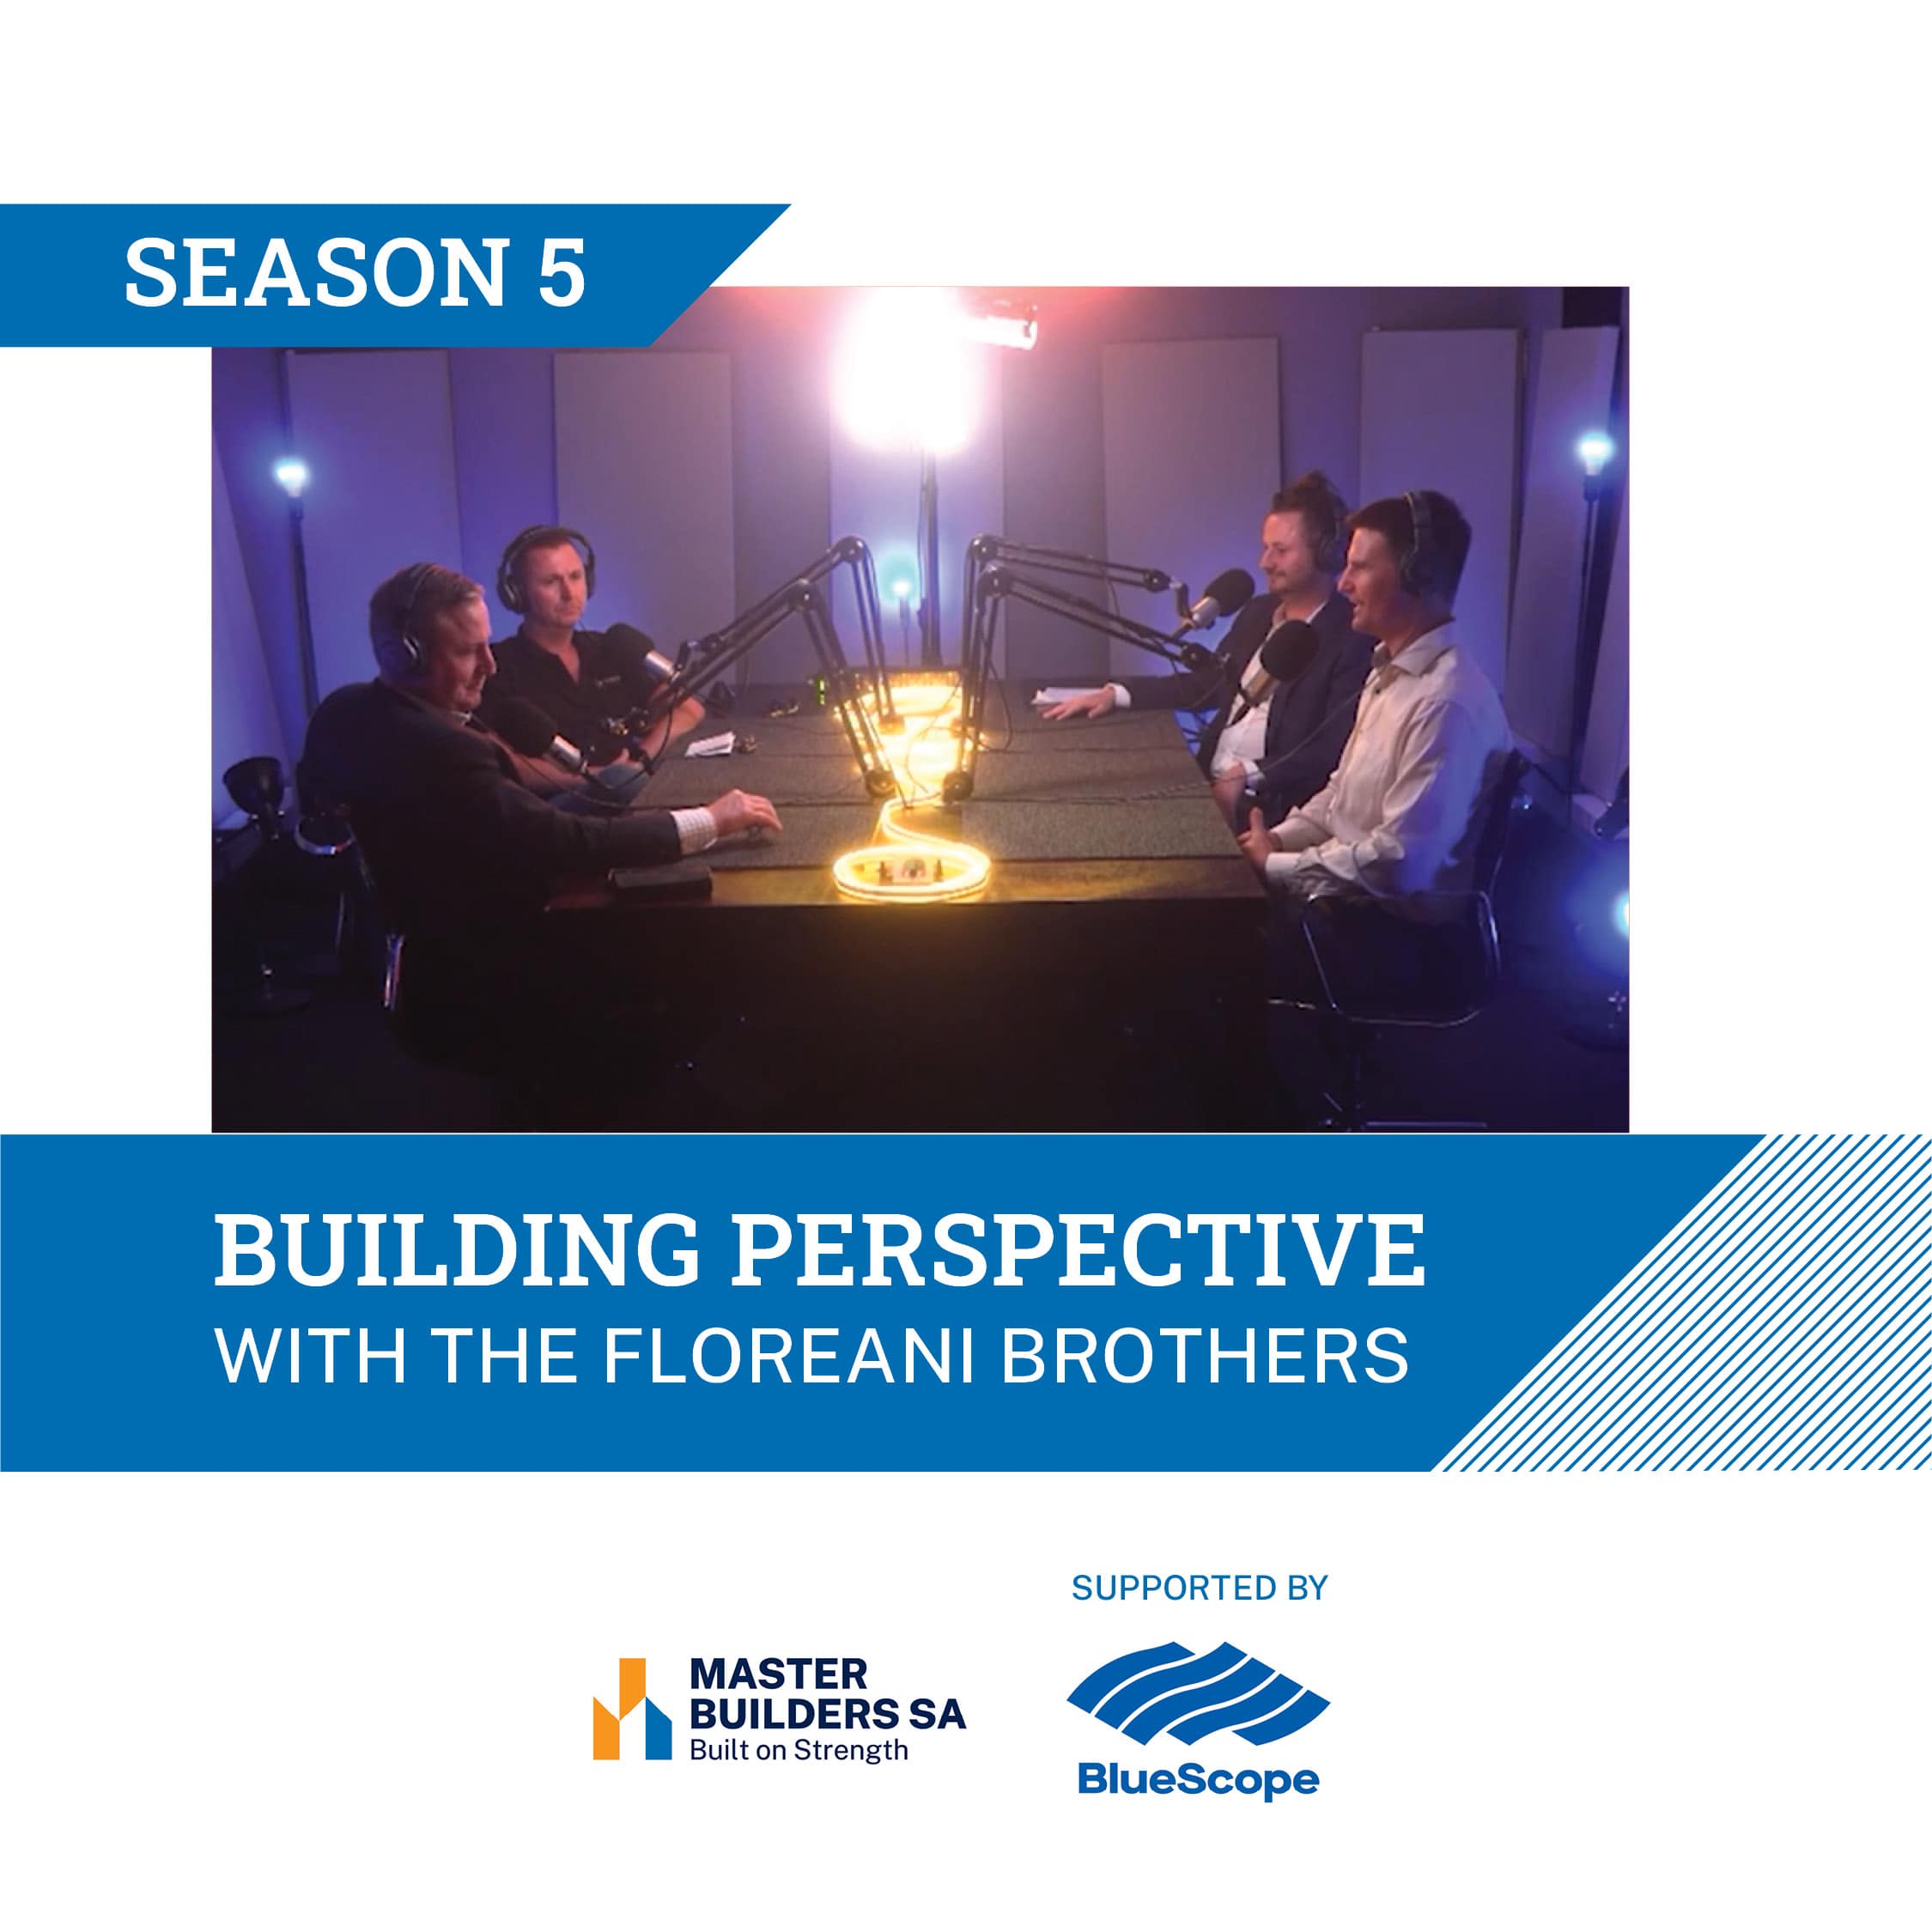 Building Perspective_Season5_Floriani Brothers